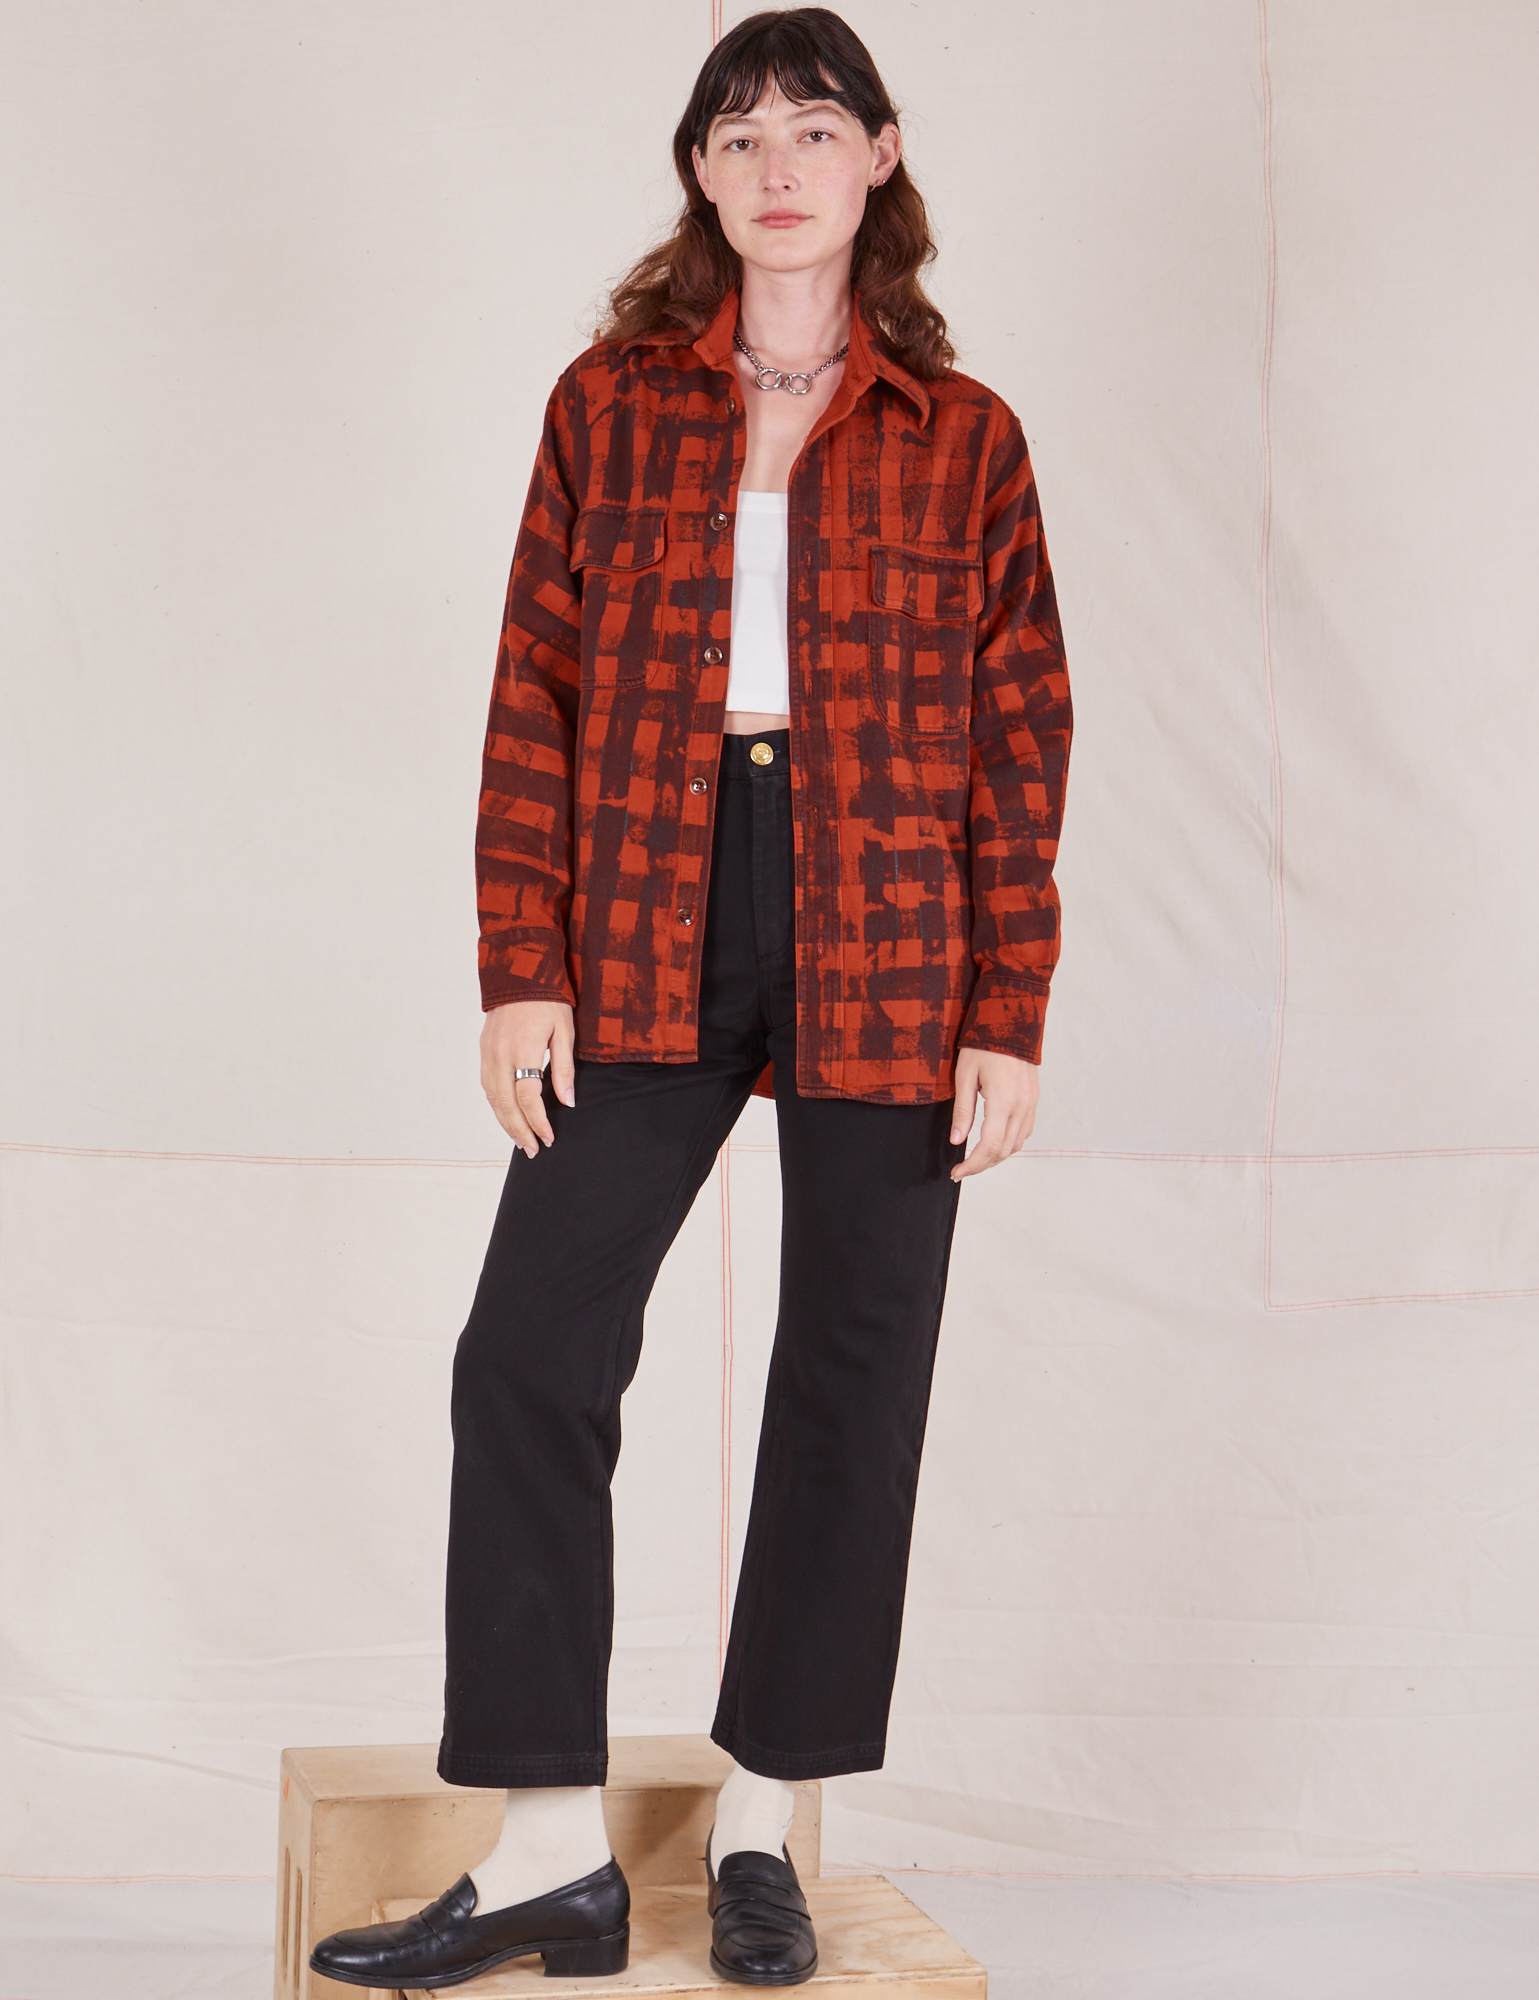 Alex is 5&#39;8&quot; and wearing P Plaid Flannel Overshirt in Paprika paired with black Work Pants